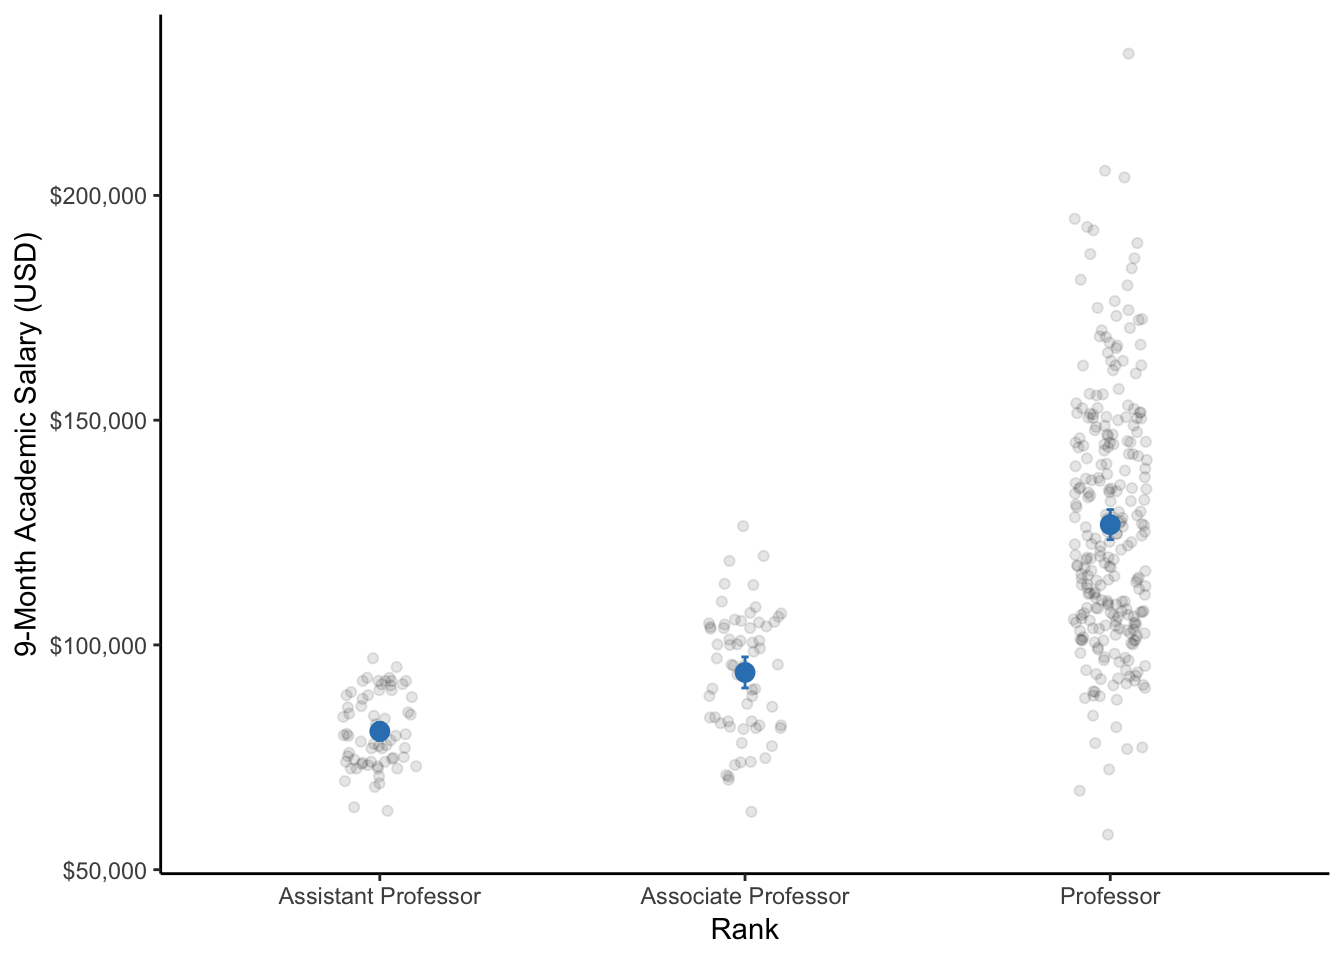 A dot plot of the 9-month academic salaries of professors by their rank within the university (i.e., assistant professor, associate professor, and professor). Respectively for each rank, the dot represents the mean salary and the bars represent the 95% CI. 
Note: The data points are only jittered (dispersed) for easier visualization of all data points.